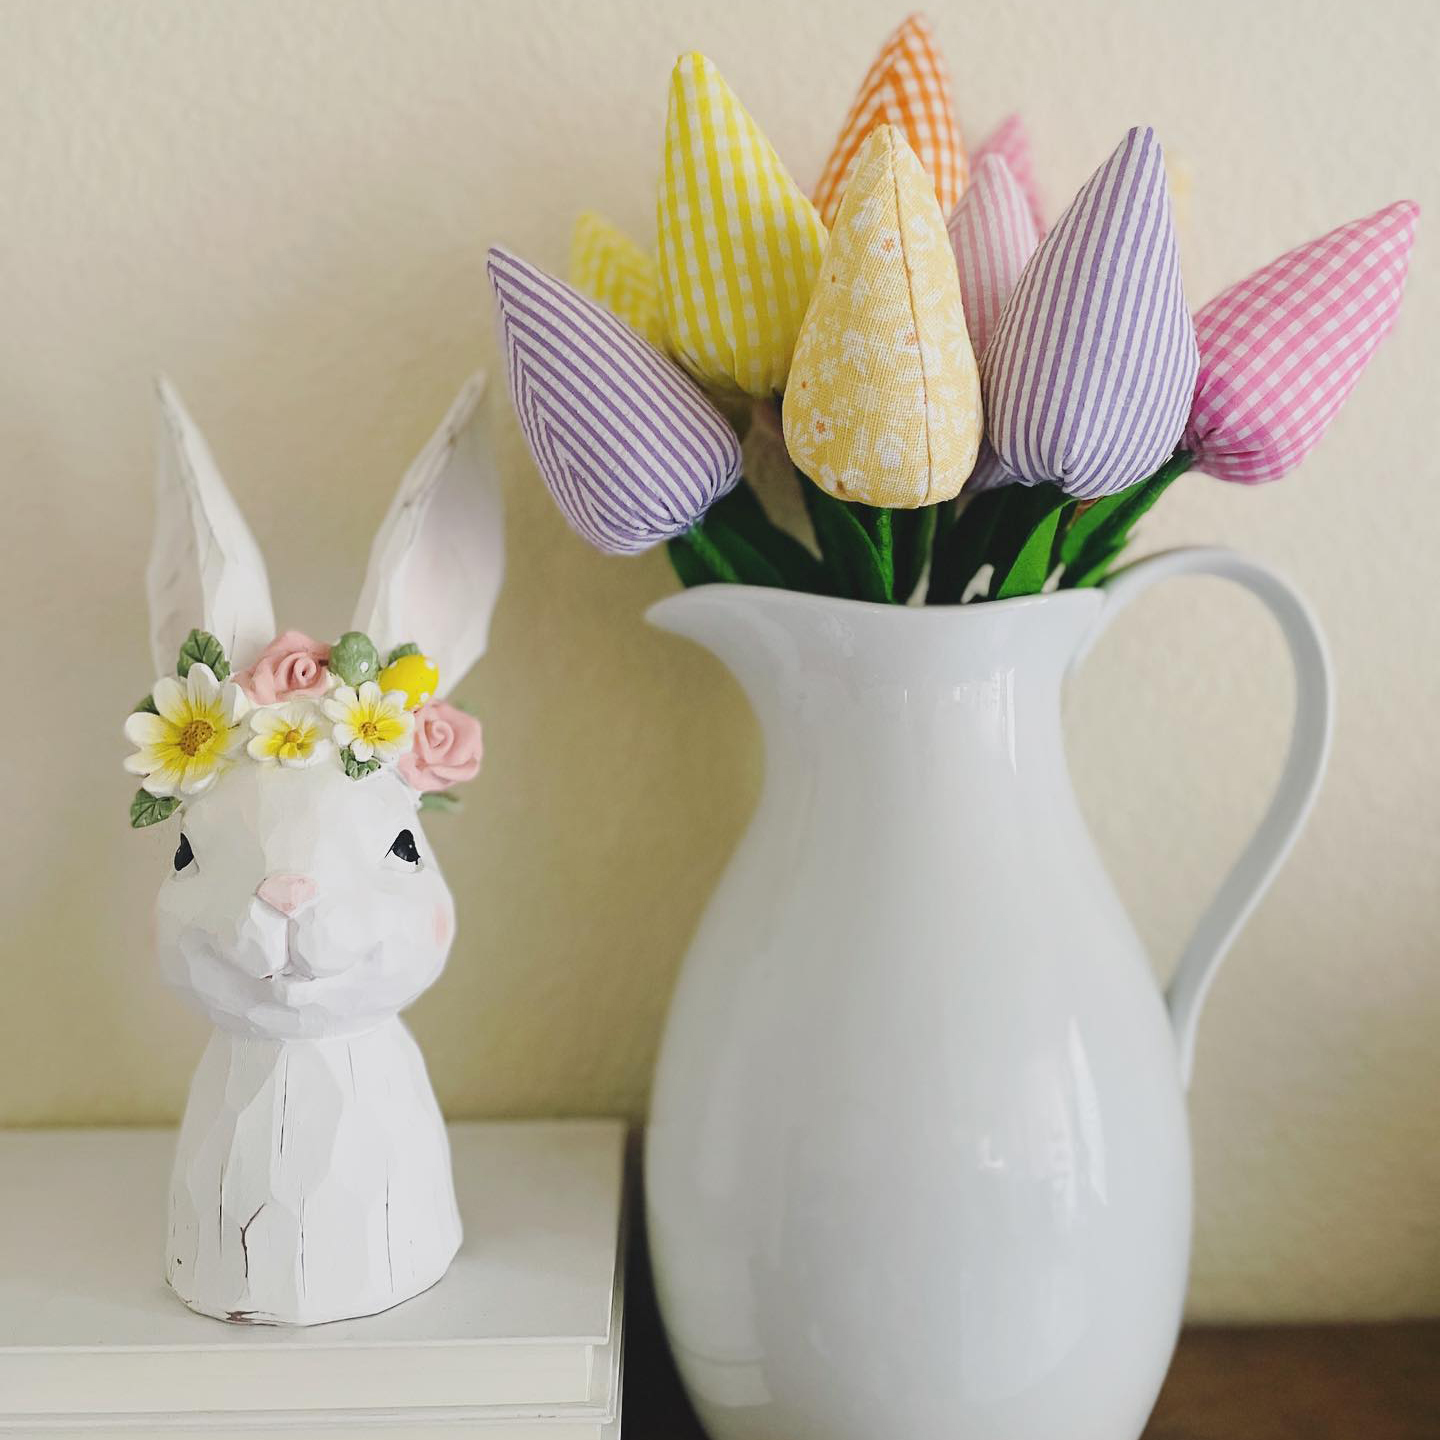 Low-cost cute Easter ceramic bunny and a white ceramic vase with Spring flowers from a Ross store